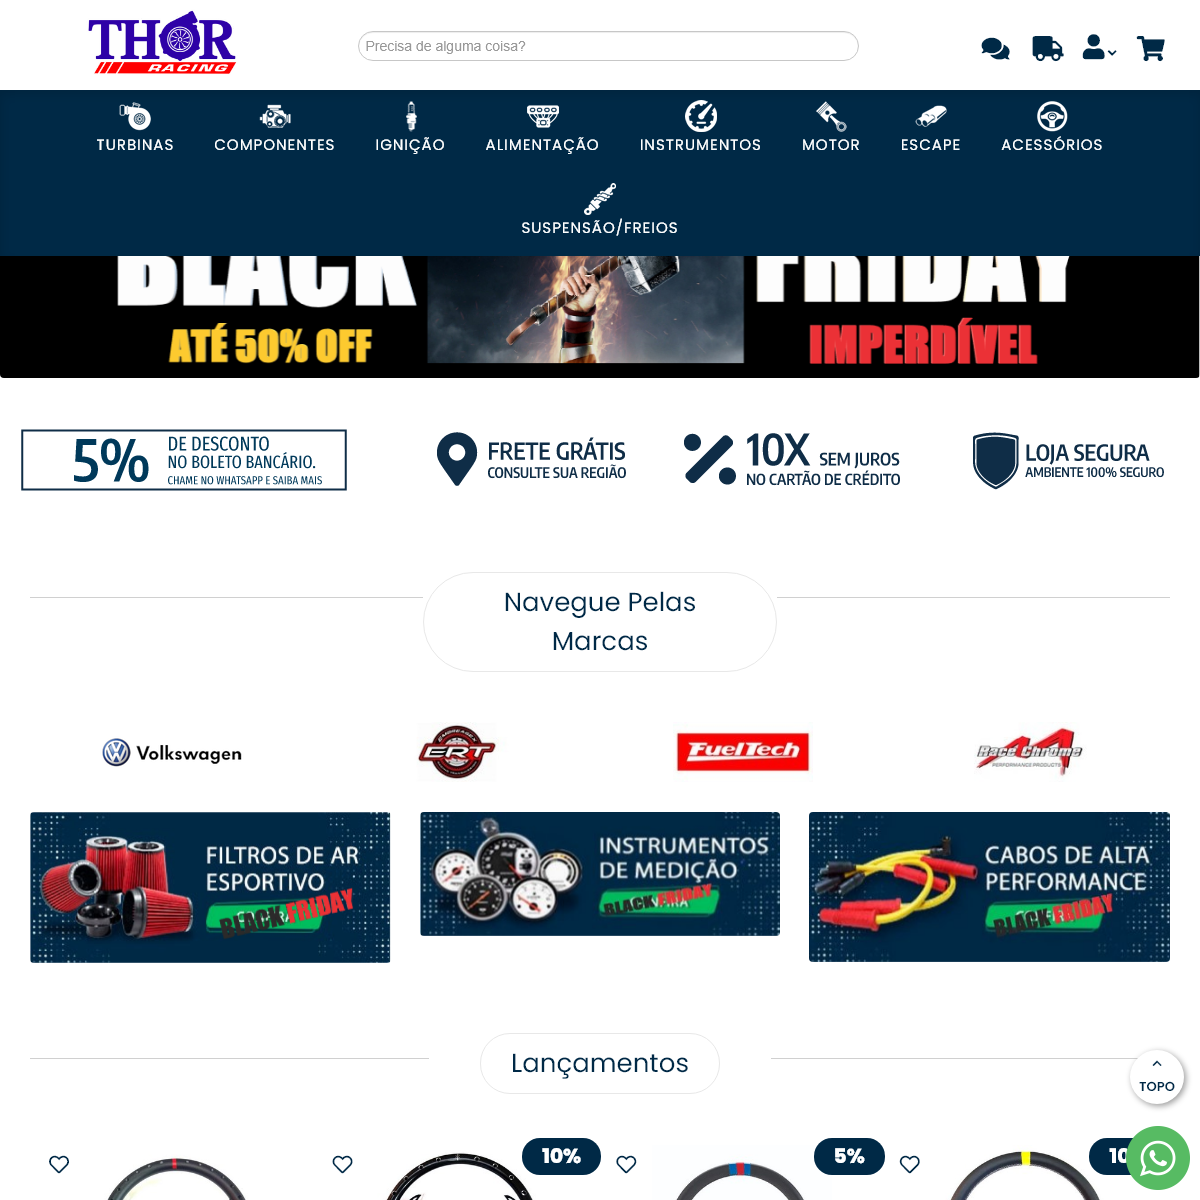 A complete backup of thorracing.com.br